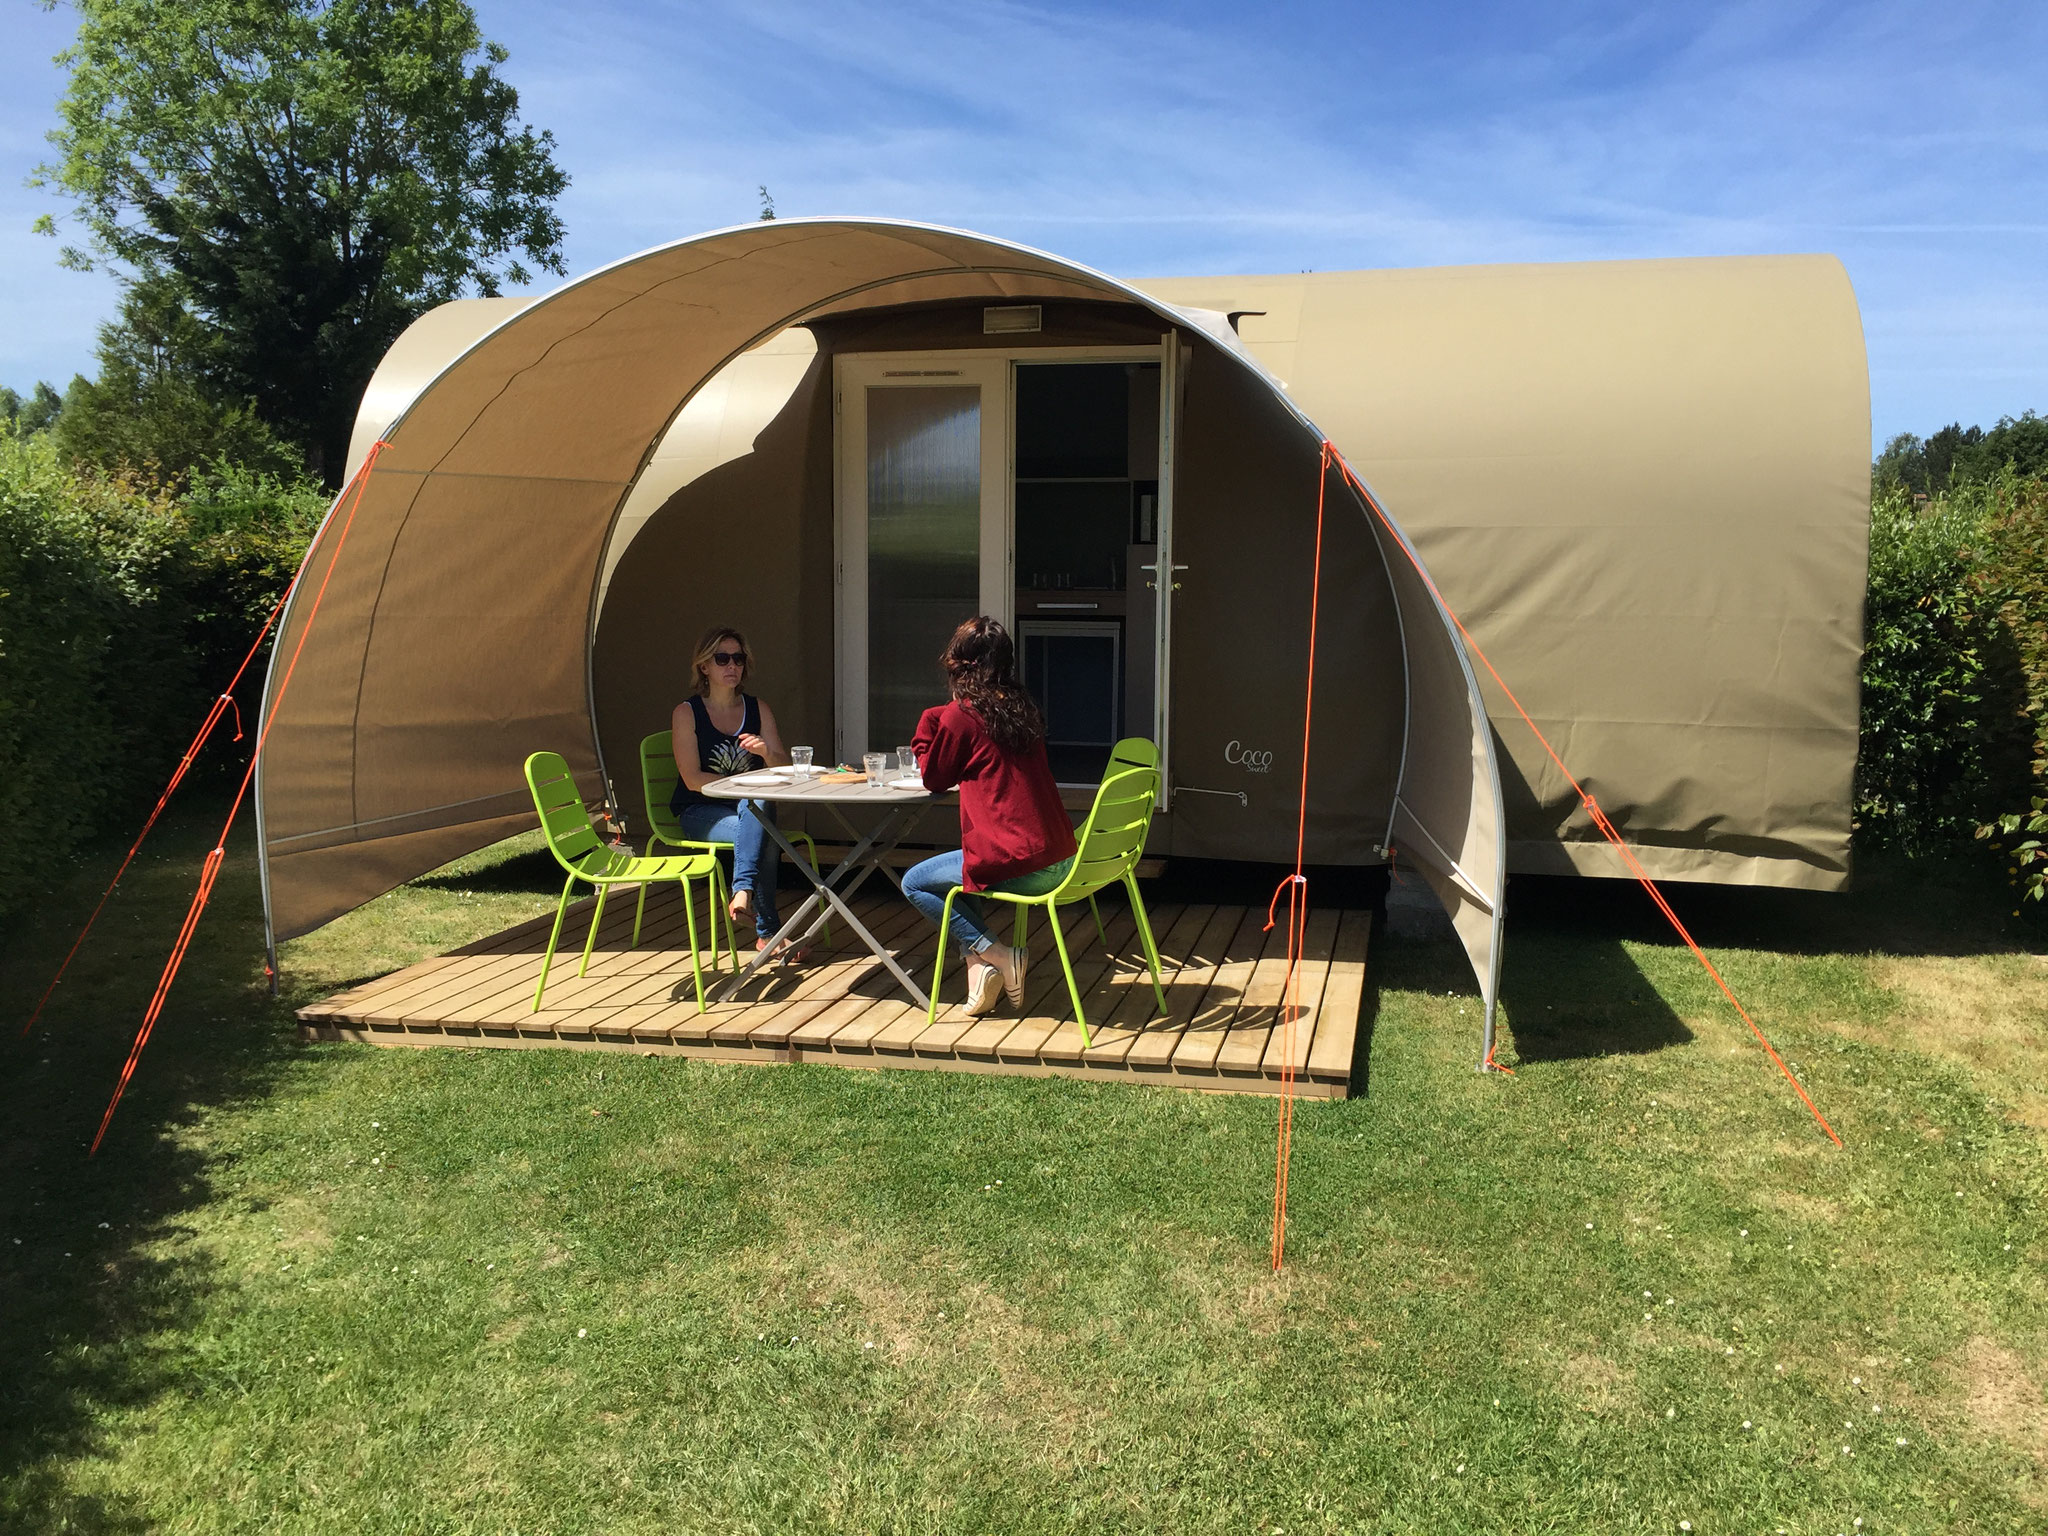  Camping Quend-Plage - Baie de Somme - Fort-Mahon - Location Mobil home - location insolite  